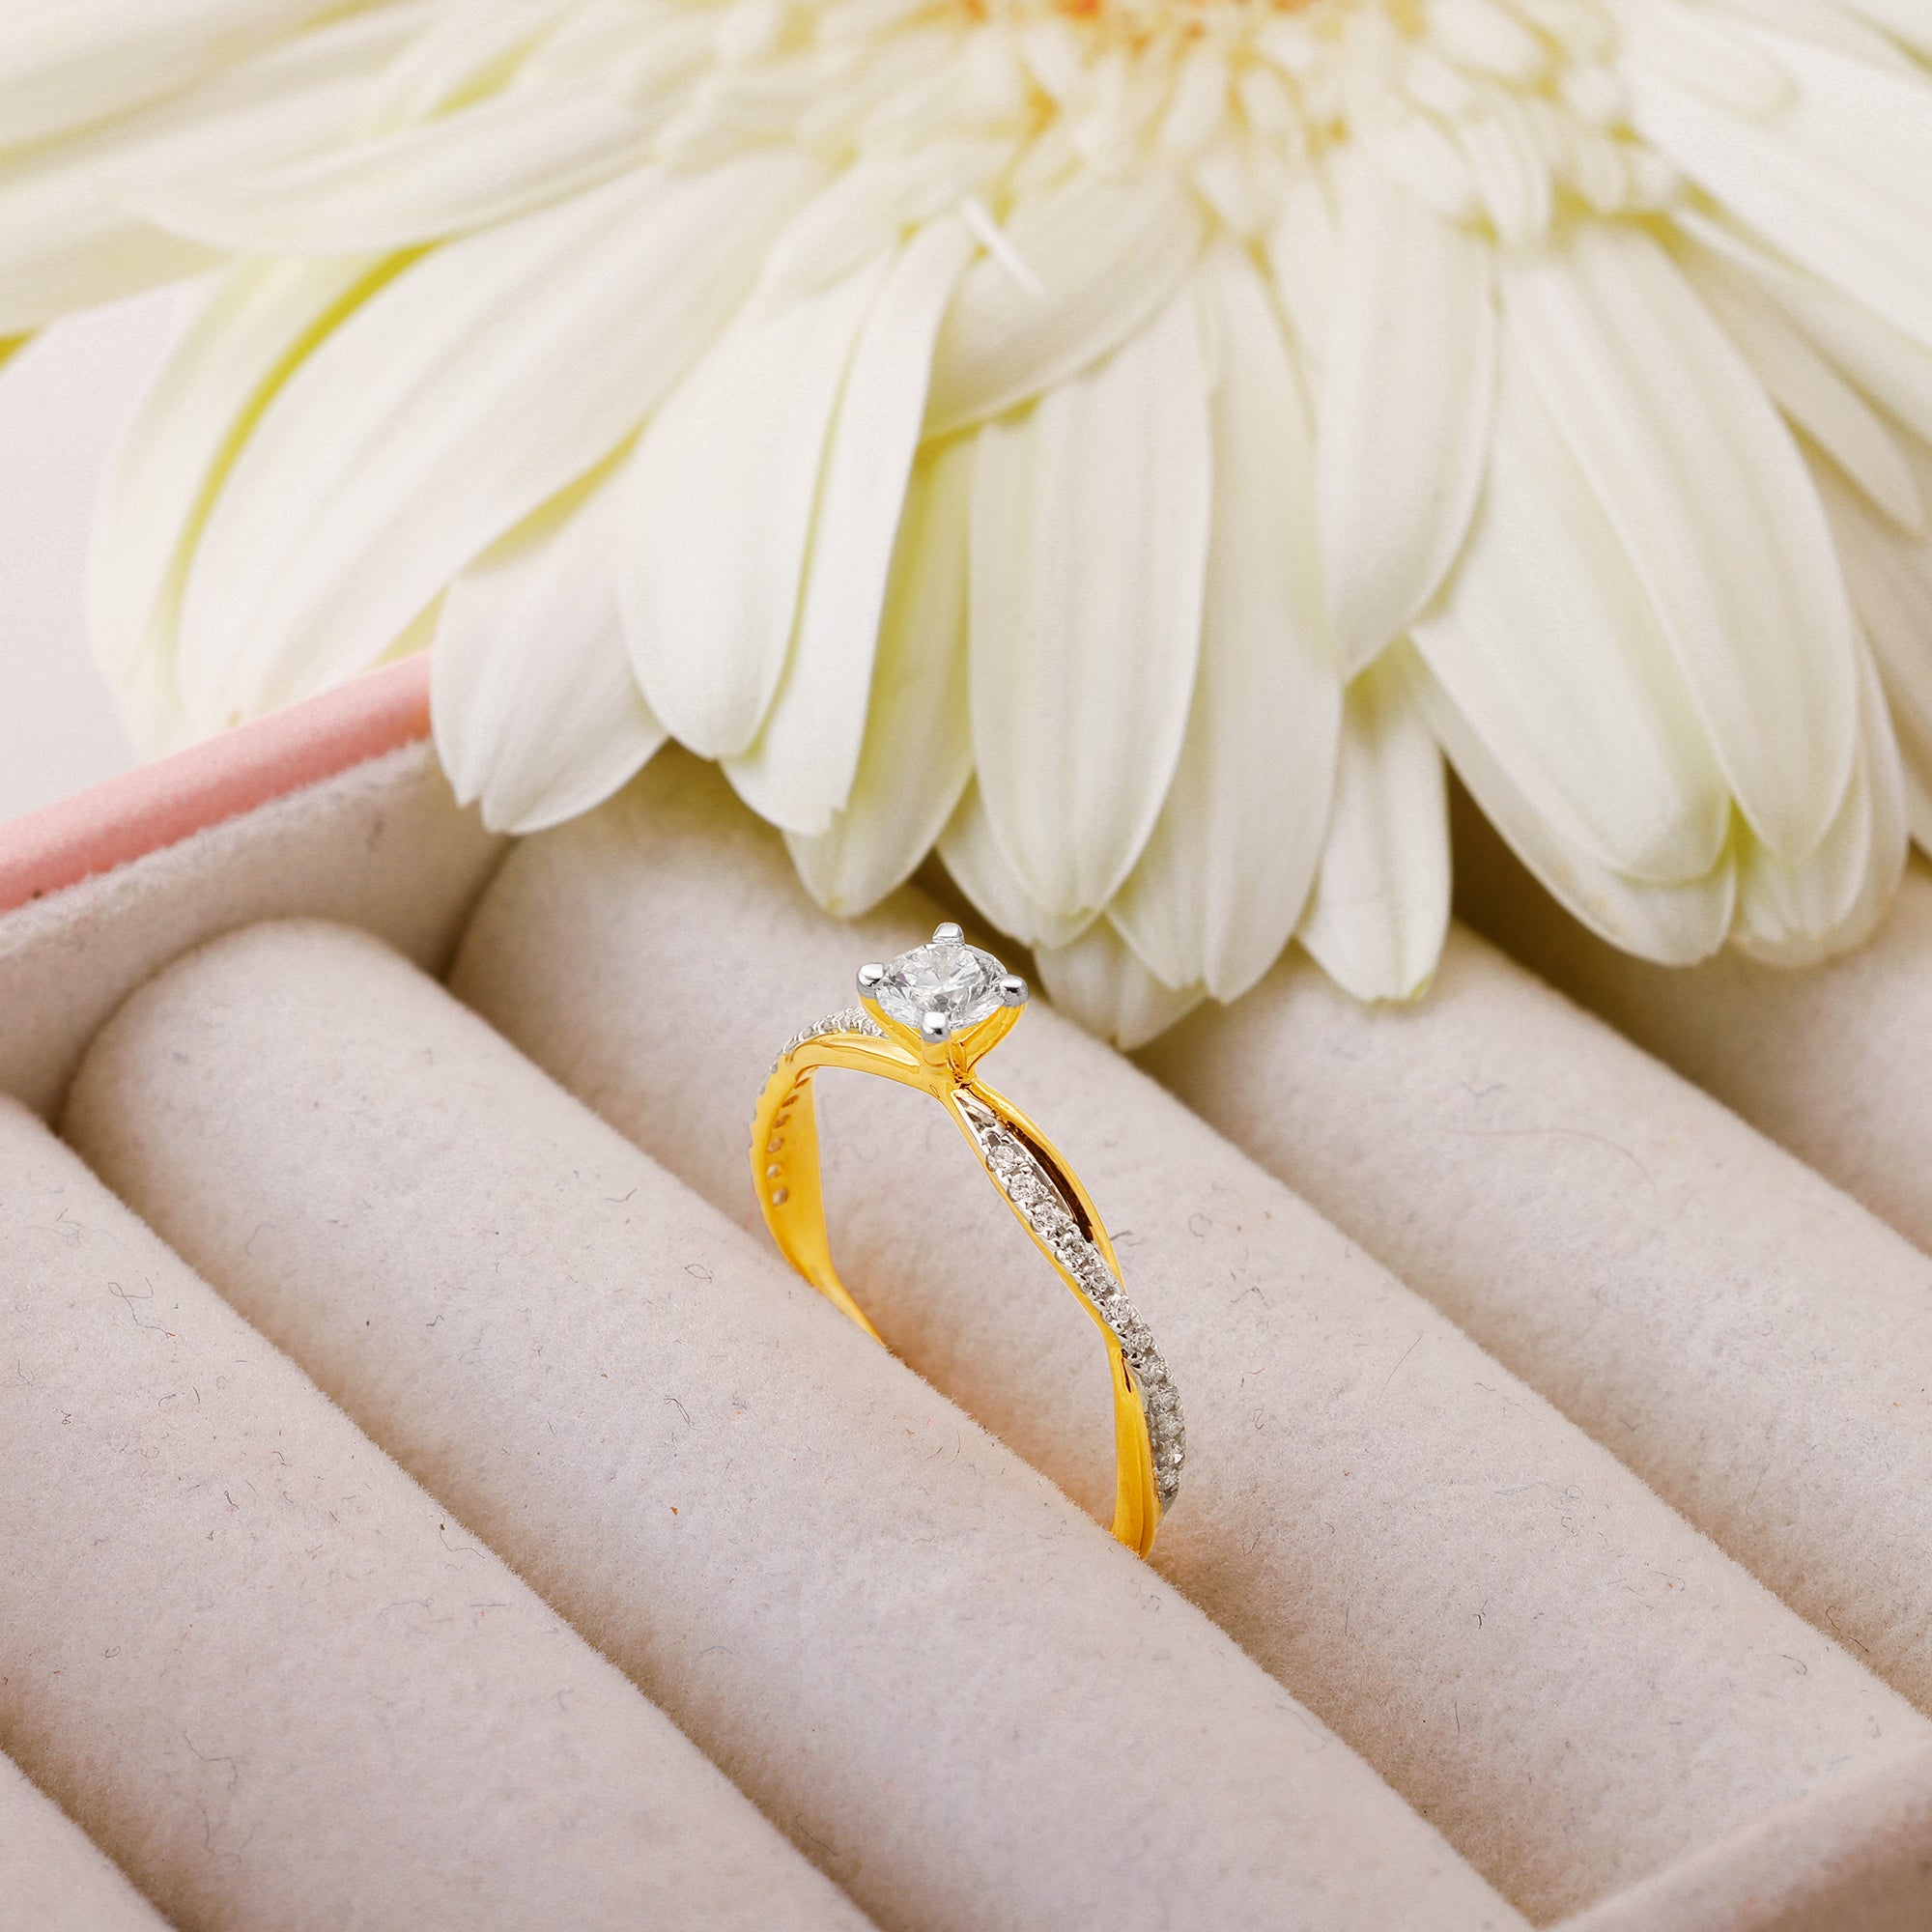 Alternative engagement ring with an edge | Wallpaper